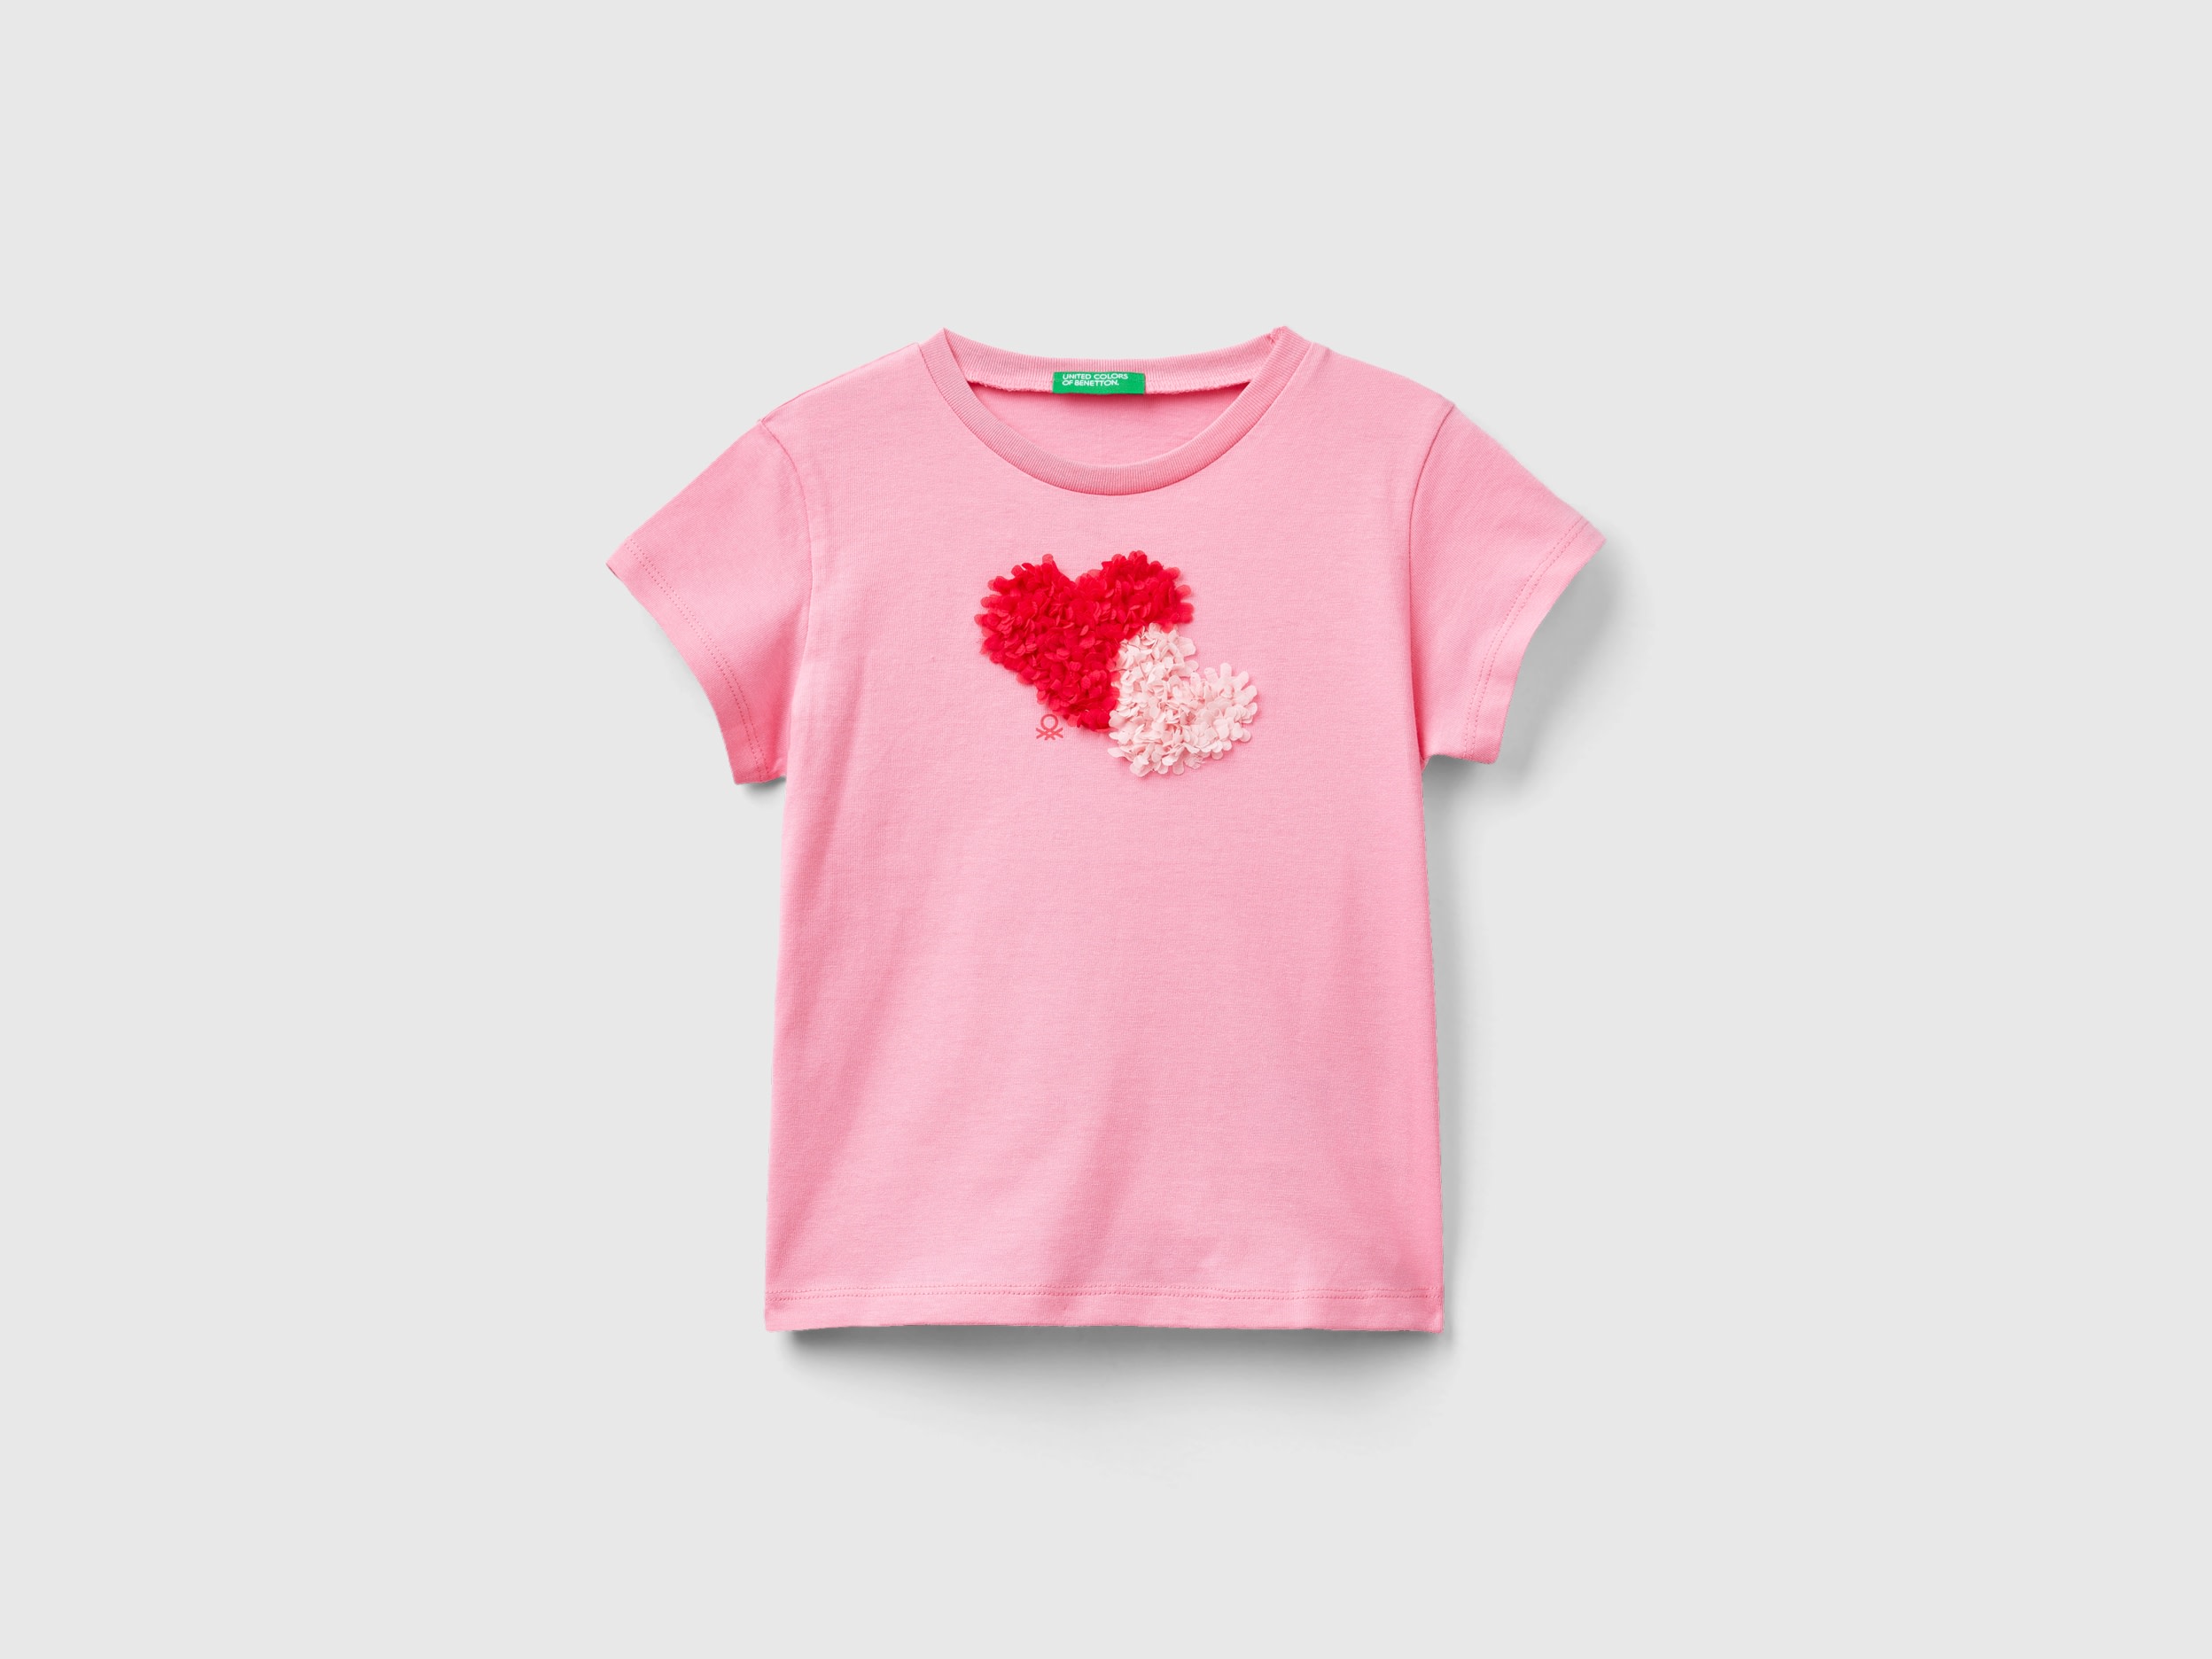 Image of Benetton, T-shirt With Petal Effect Applique, size 104, Pink, Kids